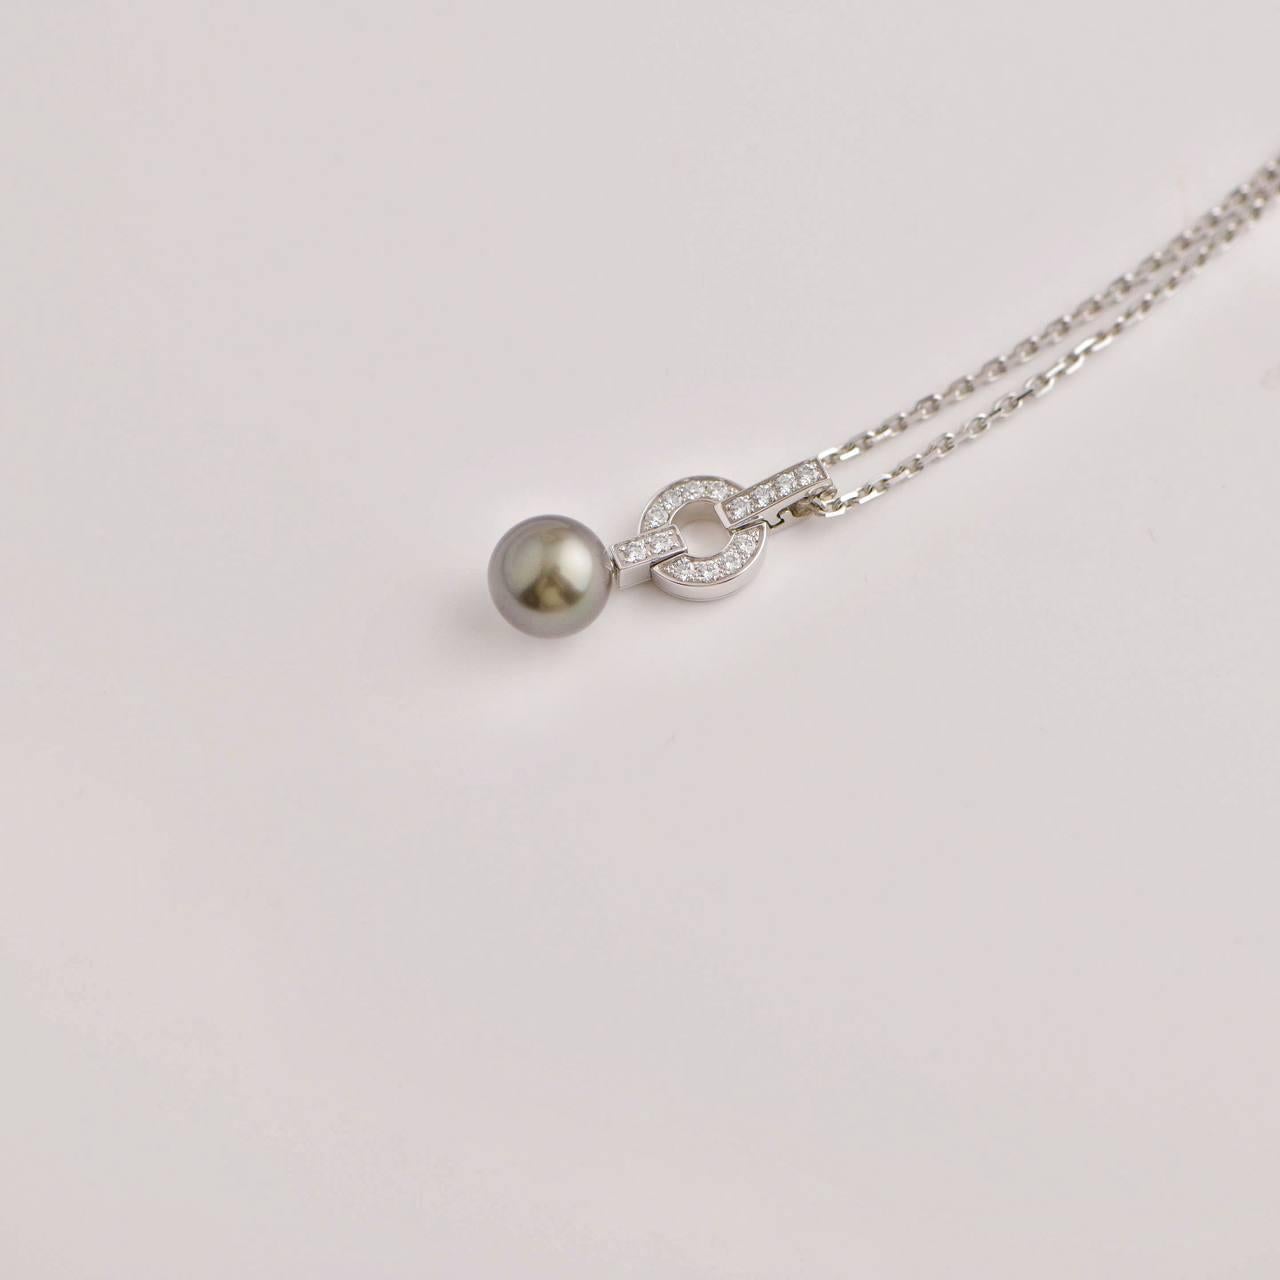 Cartier Himalia Diamond Tahitian Pearl Pendant Necklace In Excellent Condition For Sale In Banbury, GB